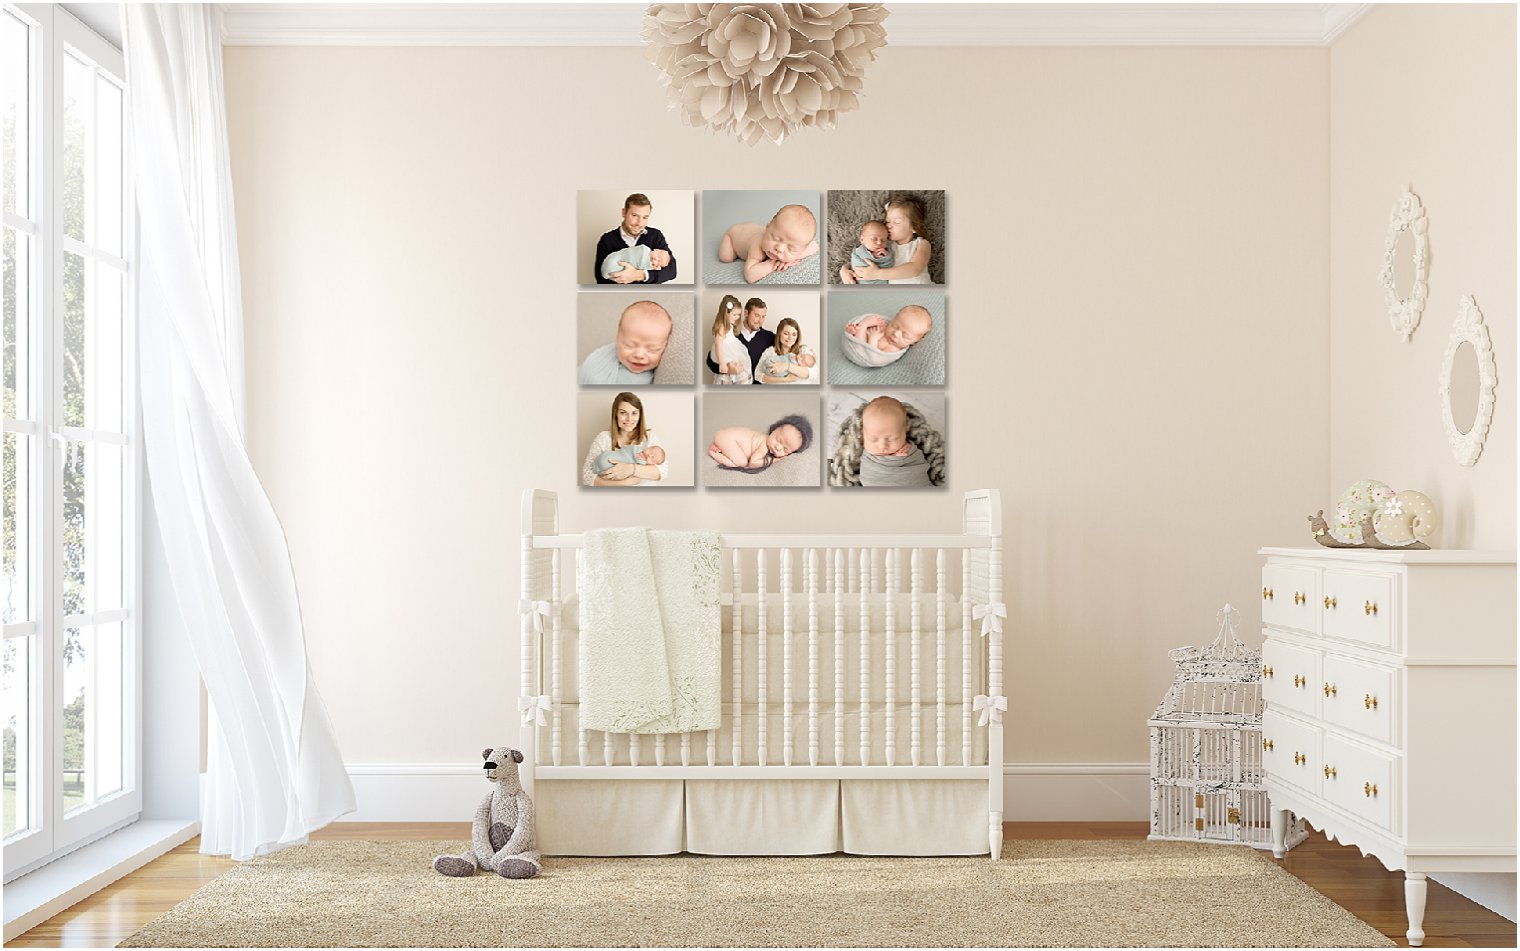 Displaying Newborn Photos in Your Home | Wall Art